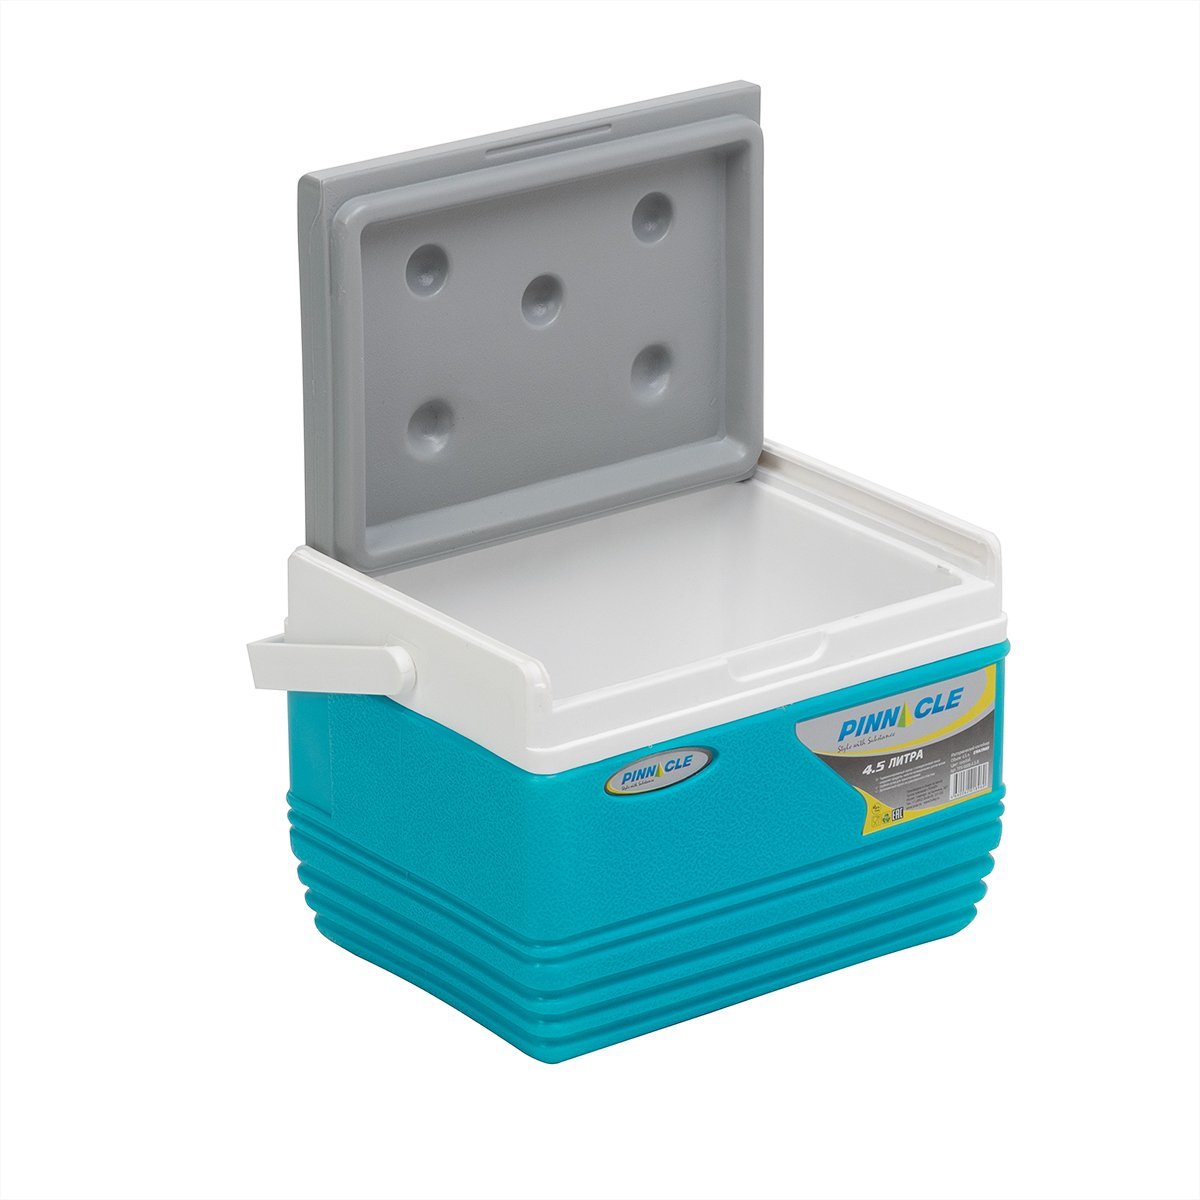 Eskimo Portable Hard-Sided Ice Chest for Camping, 4 qt, Blue with a lid widely open